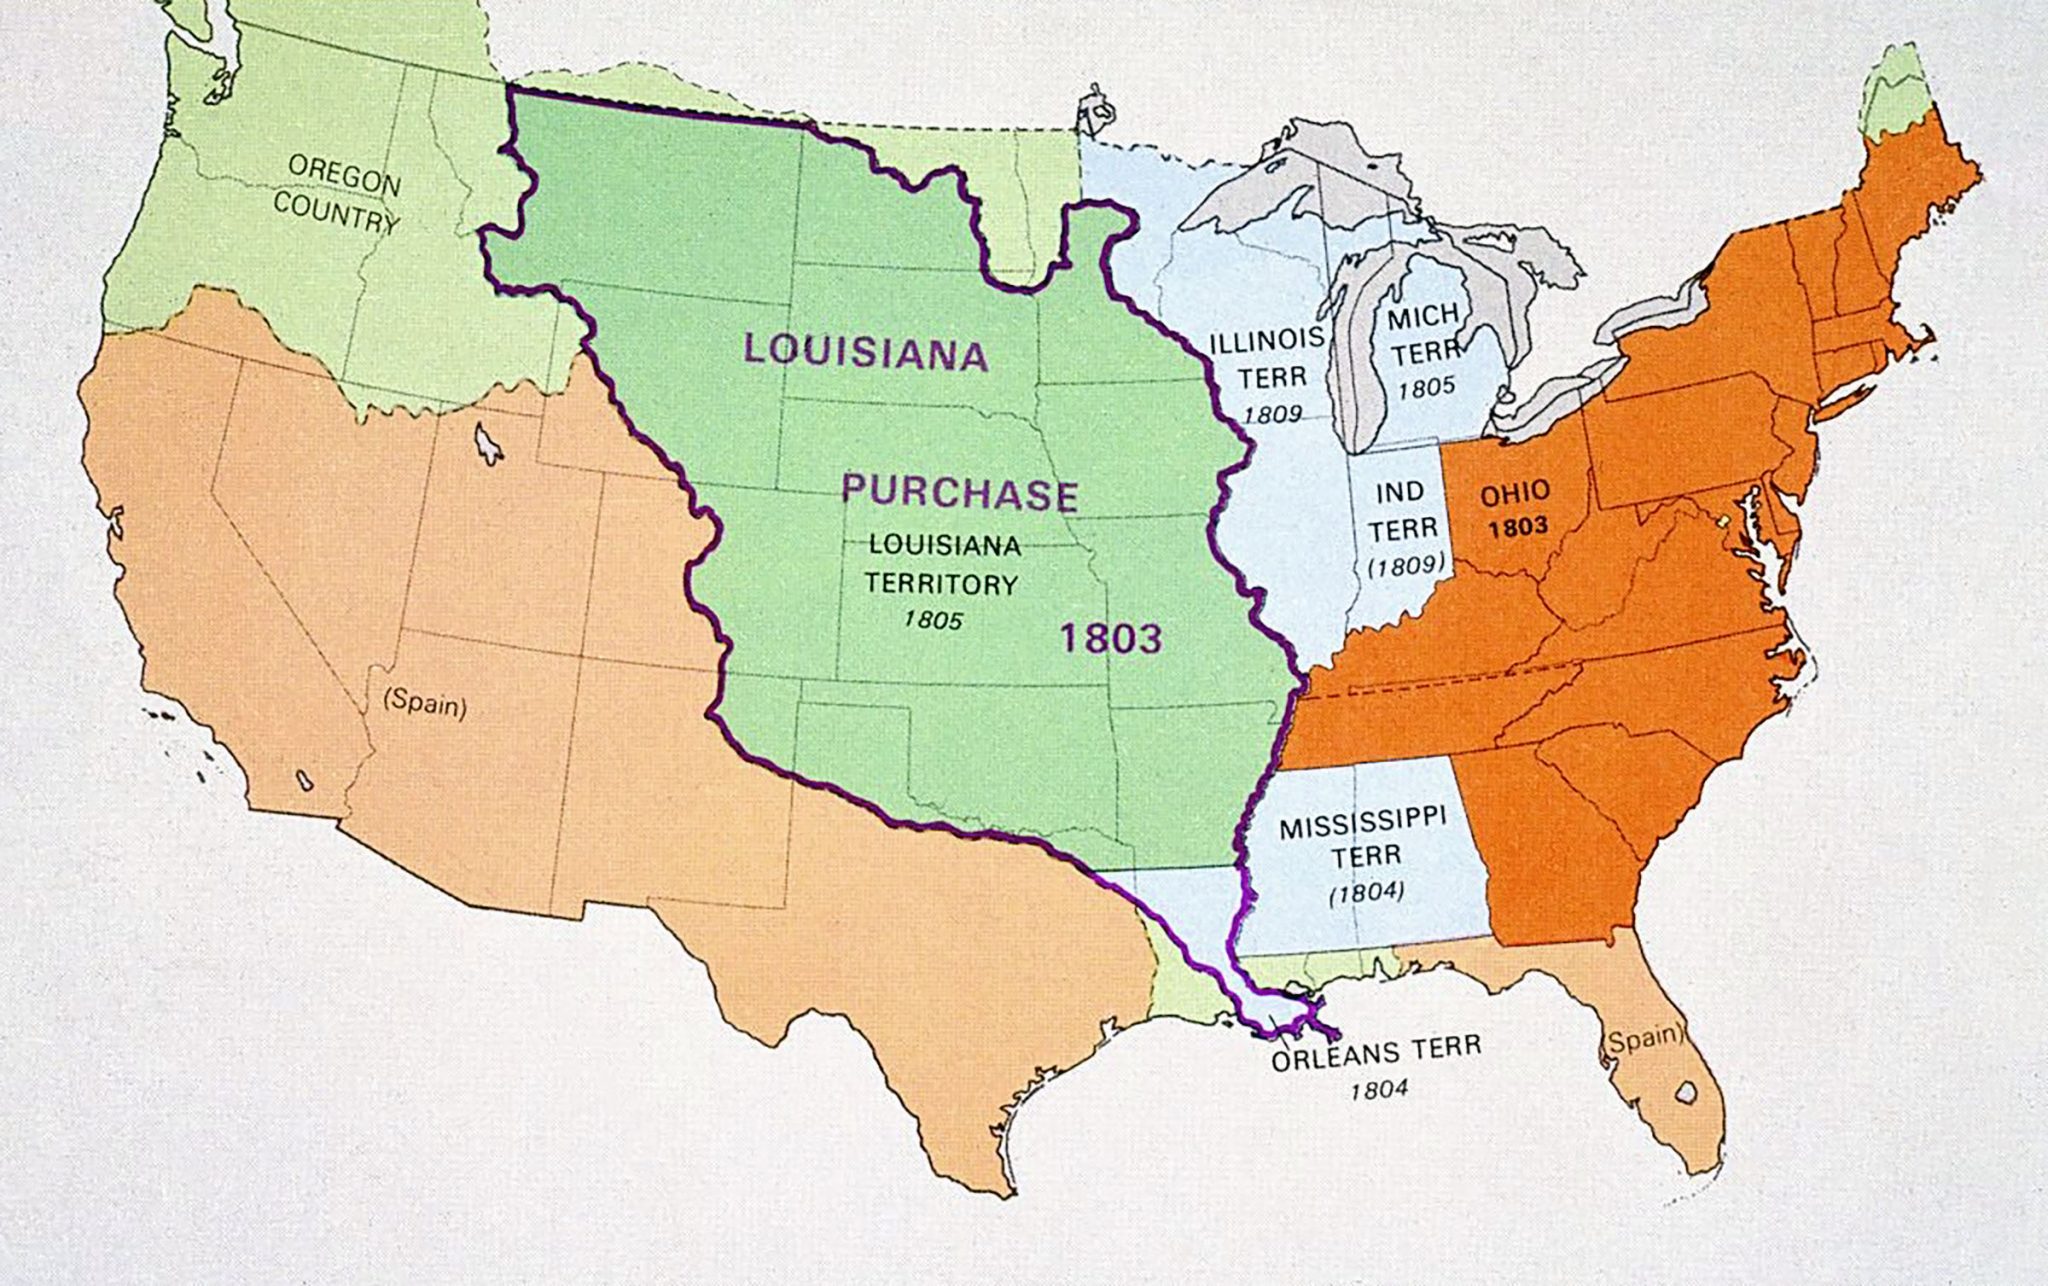 map-showing-the-expansion-of-the-united-states-with-the-louisiana